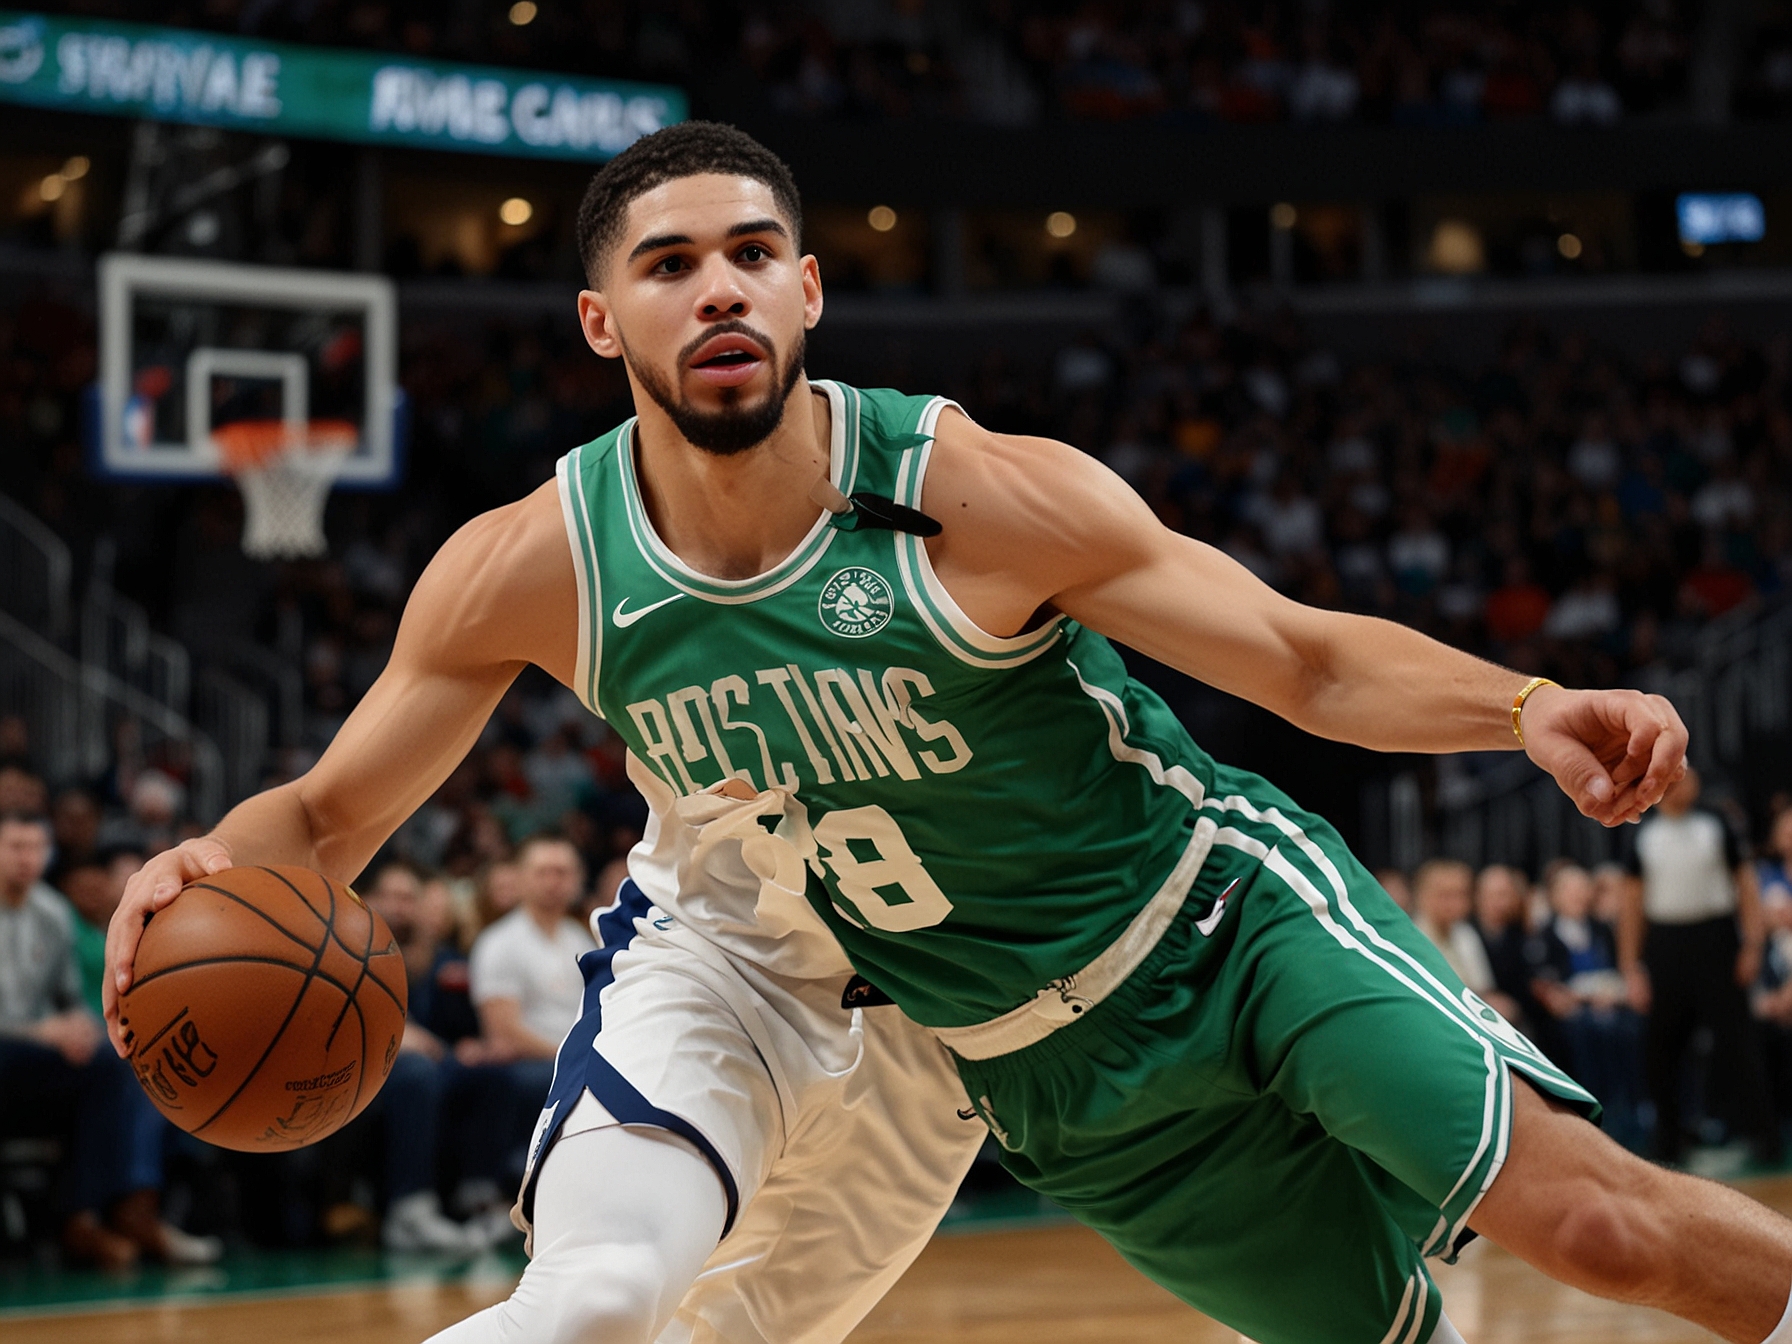 Boston Celtics' star Jayson Tatum drives to the basket past Dallas Mavericks defender Luka Dončić during Game 5 of the NBA Finals, exemplifying Tatum's offensive prowess and leadership.